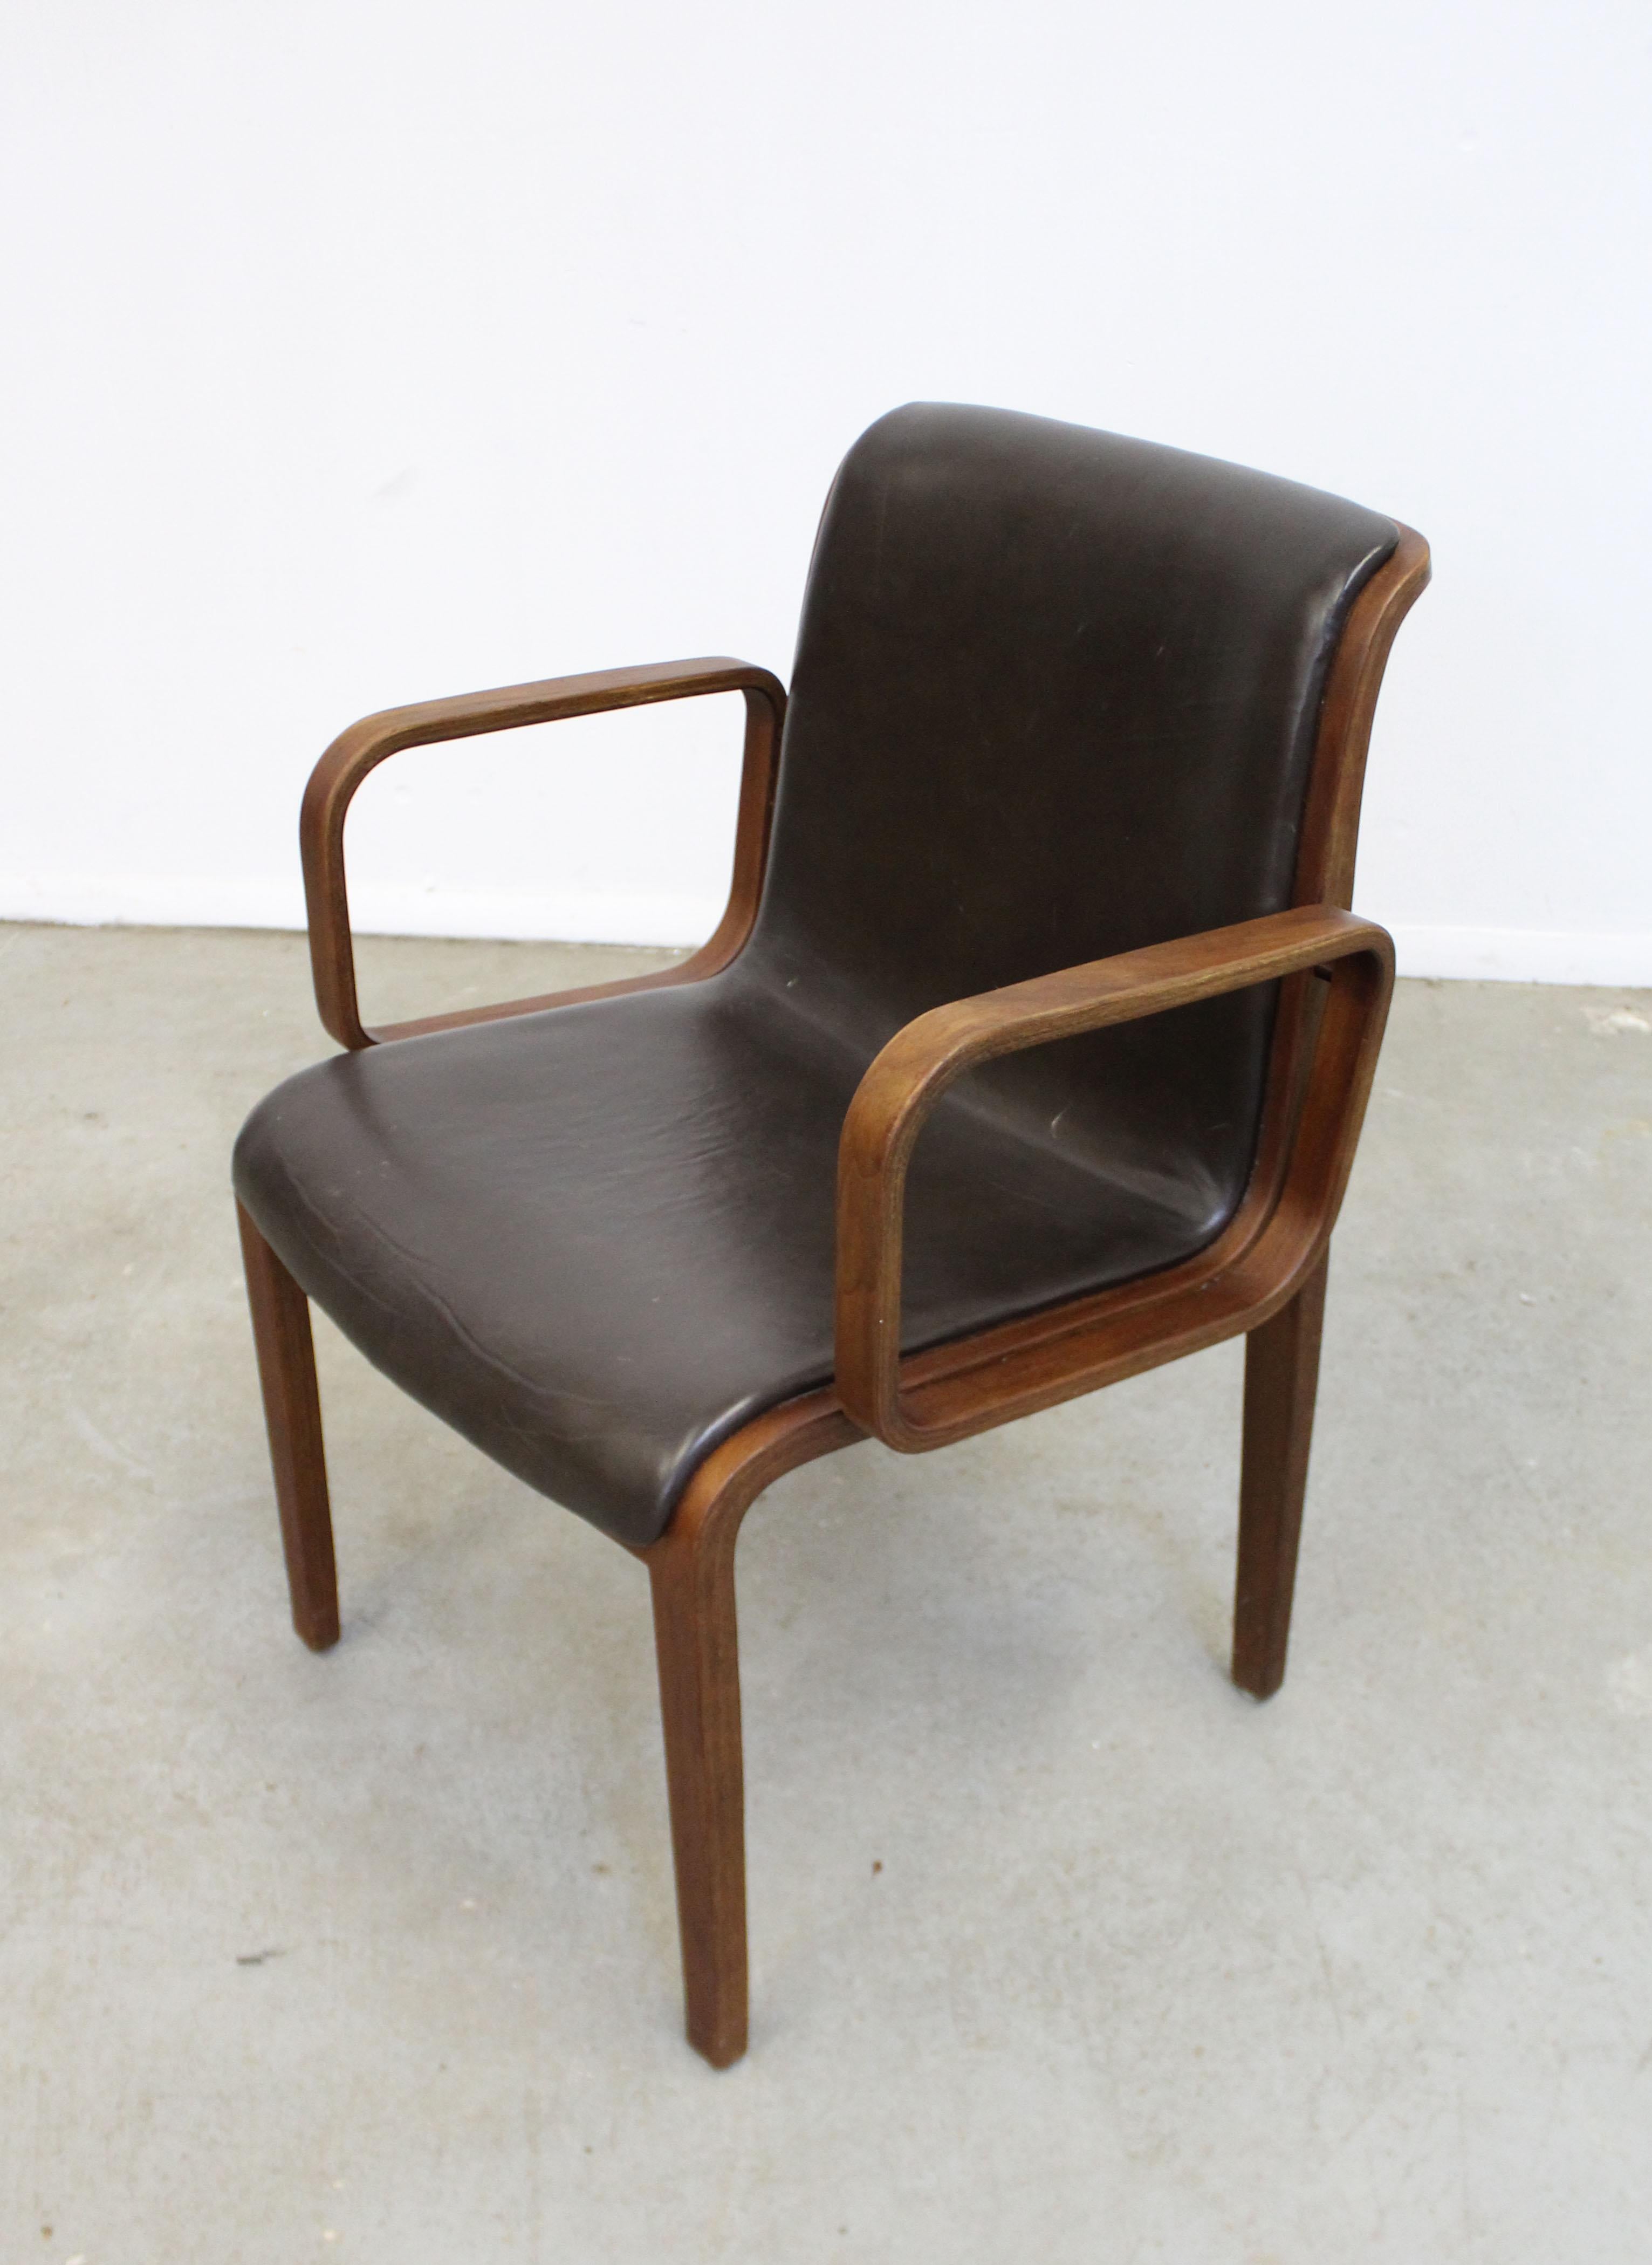 Offered is a vintage Mid-Century Modern armchair (model 1305UO) designed by Bill Stephens for Knoll, circa 1970. It is made with bentwood and we believe the upholstery is Naugahyde or leather. In good condition with some stains on the upholstery and